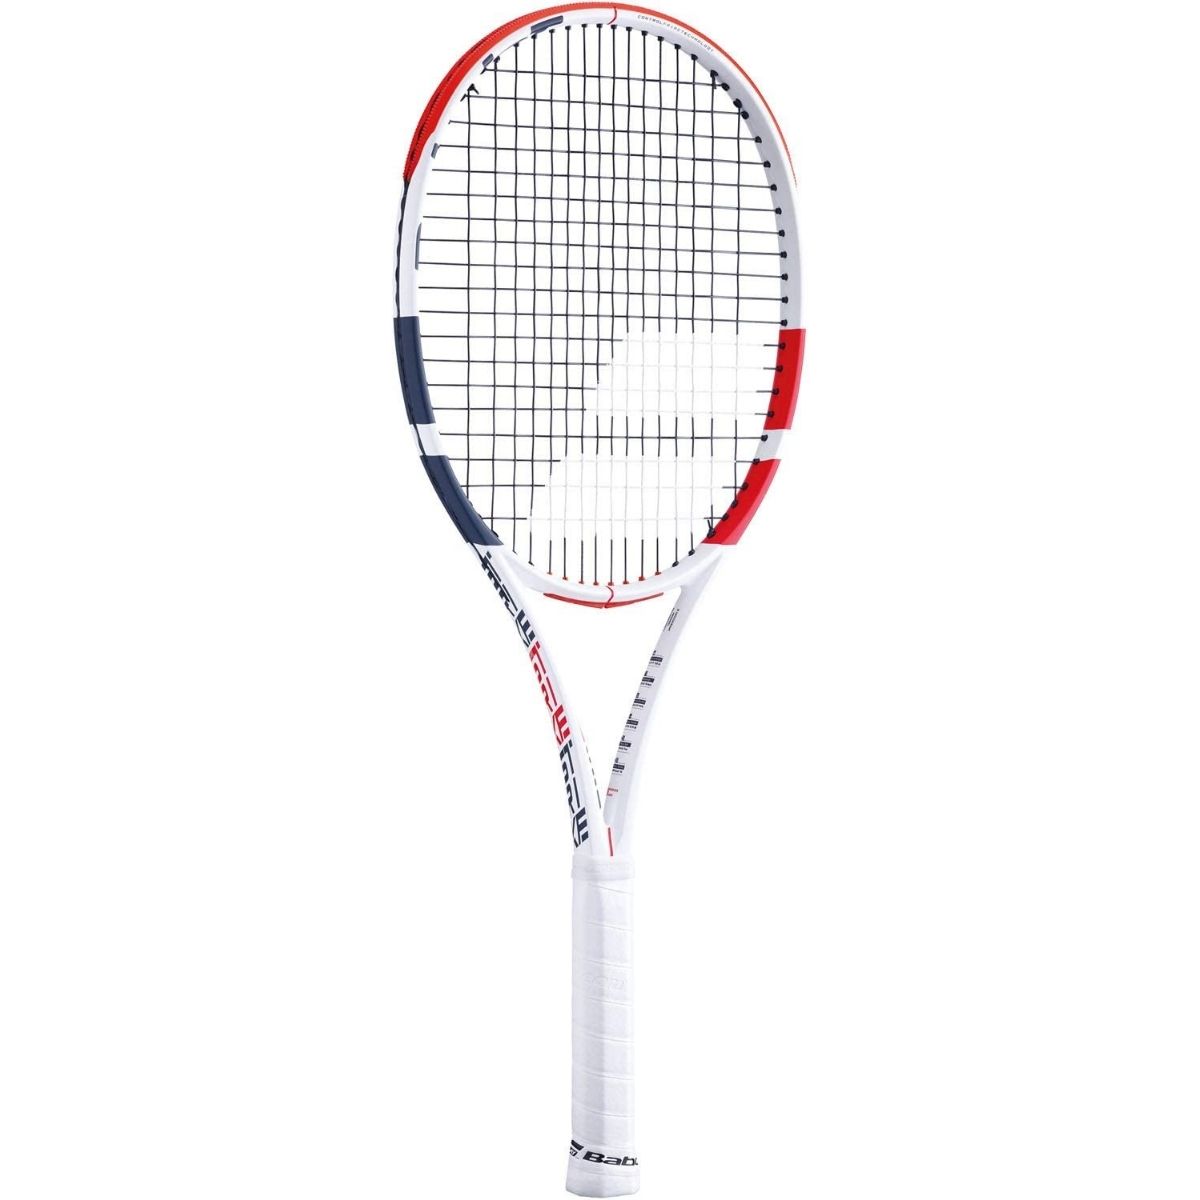 The Best Rackets for One Handed Backhand Options: Babolat Pure Strike 